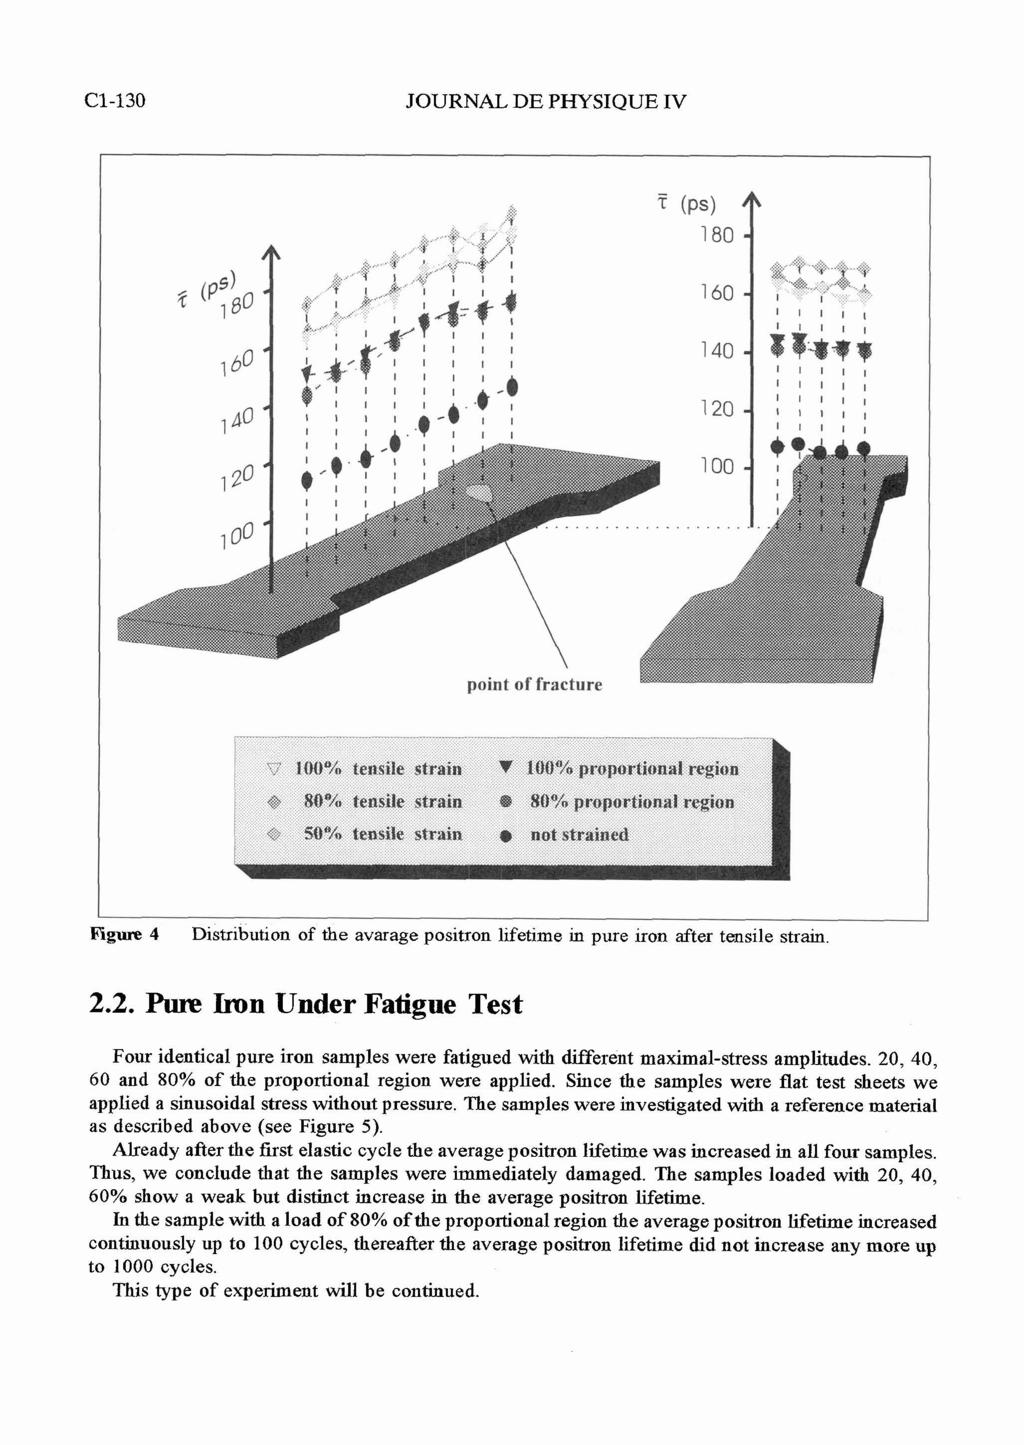 C1-130 JOURNAL DE PHYSQUE V point of fracture Rh' '23.*,, Figure 4 Distribution of the avarage positron lifetime in pure iron after tensile strain. 2.2. Pum mn Under Fatigue Test Four identical pure iron samples were fatigued with different maximal-stress amplitudes.